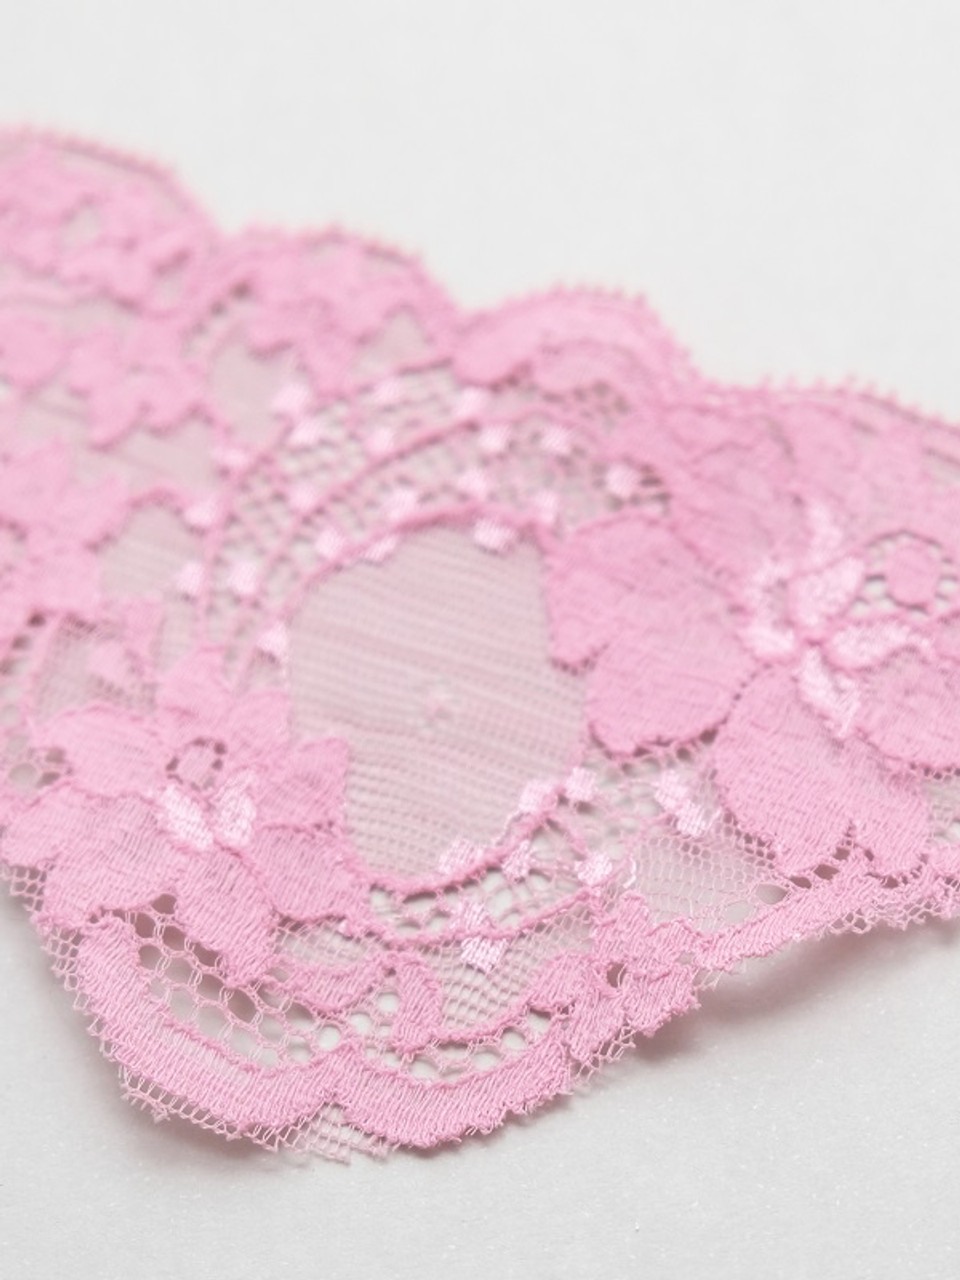 Lace Galloon with Pink Ribbon, Trim and Edges